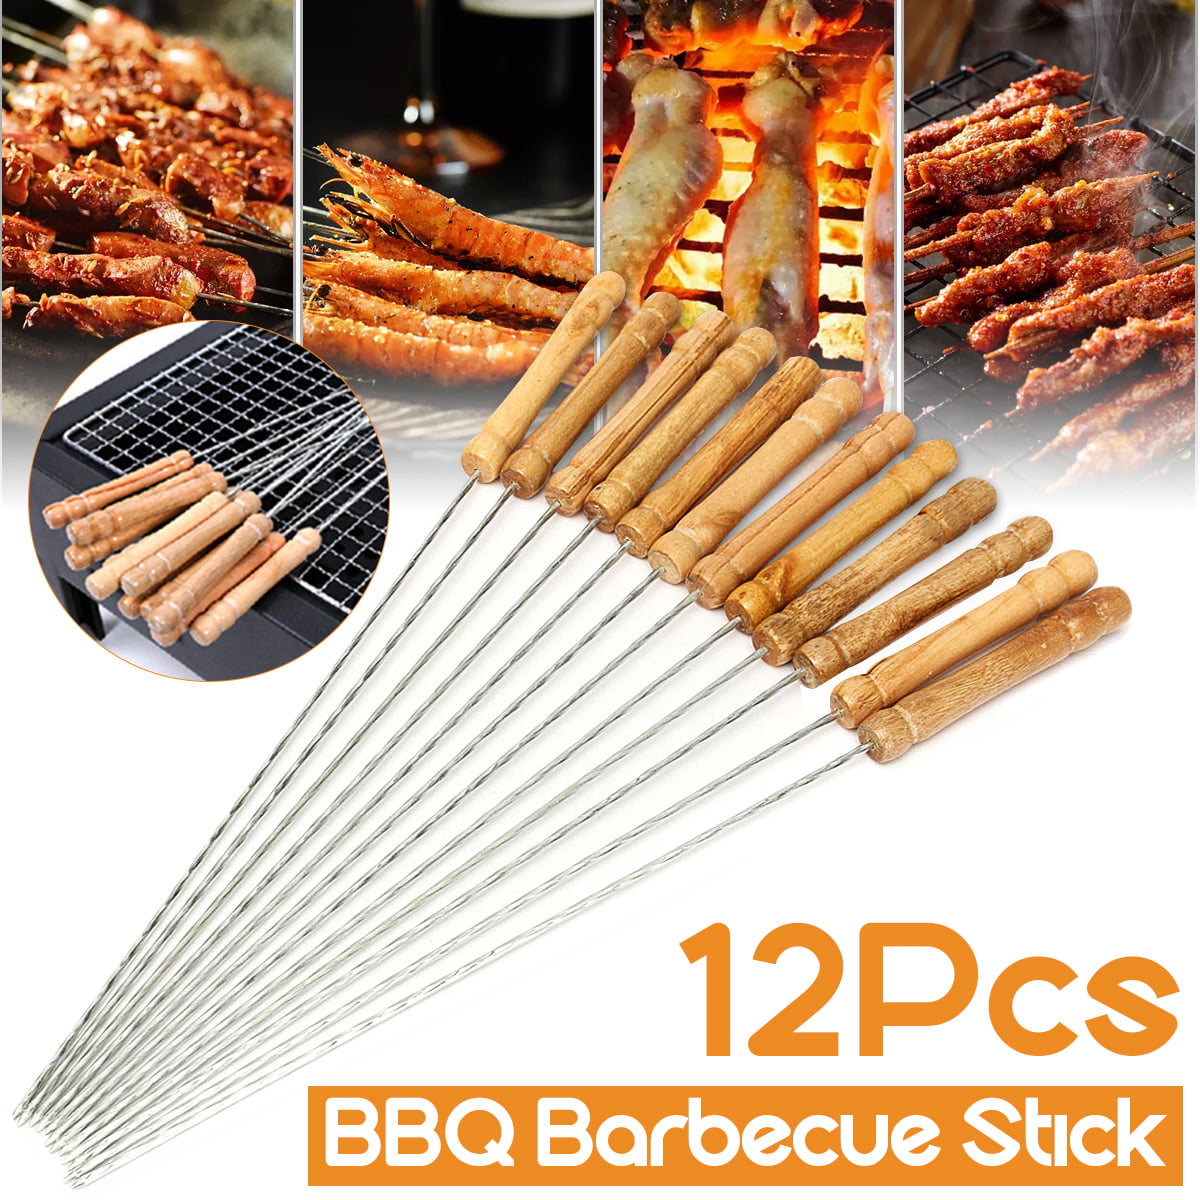 12 x METAL BBQ BARBECUE SKEWERS STICKS WOODEN HANDLES COOKING GRILL FRYING KEBAB 